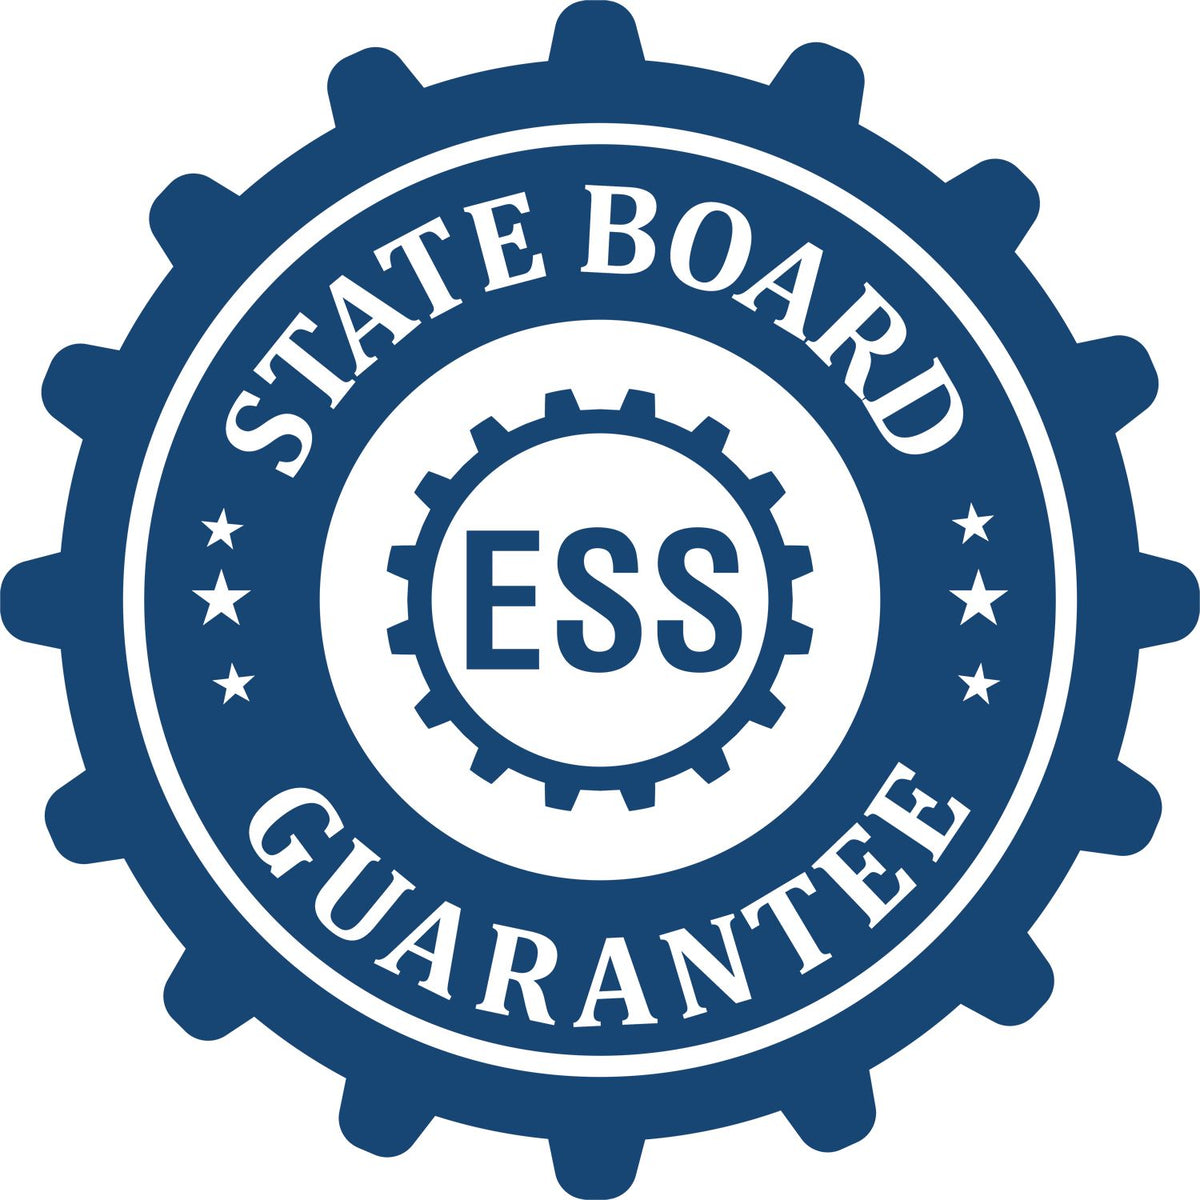 An emblem in a gear shape illustrating a state board guarantee for the MaxLight Premium Pre-Inked Montana State Seal Notarial Stamp product.